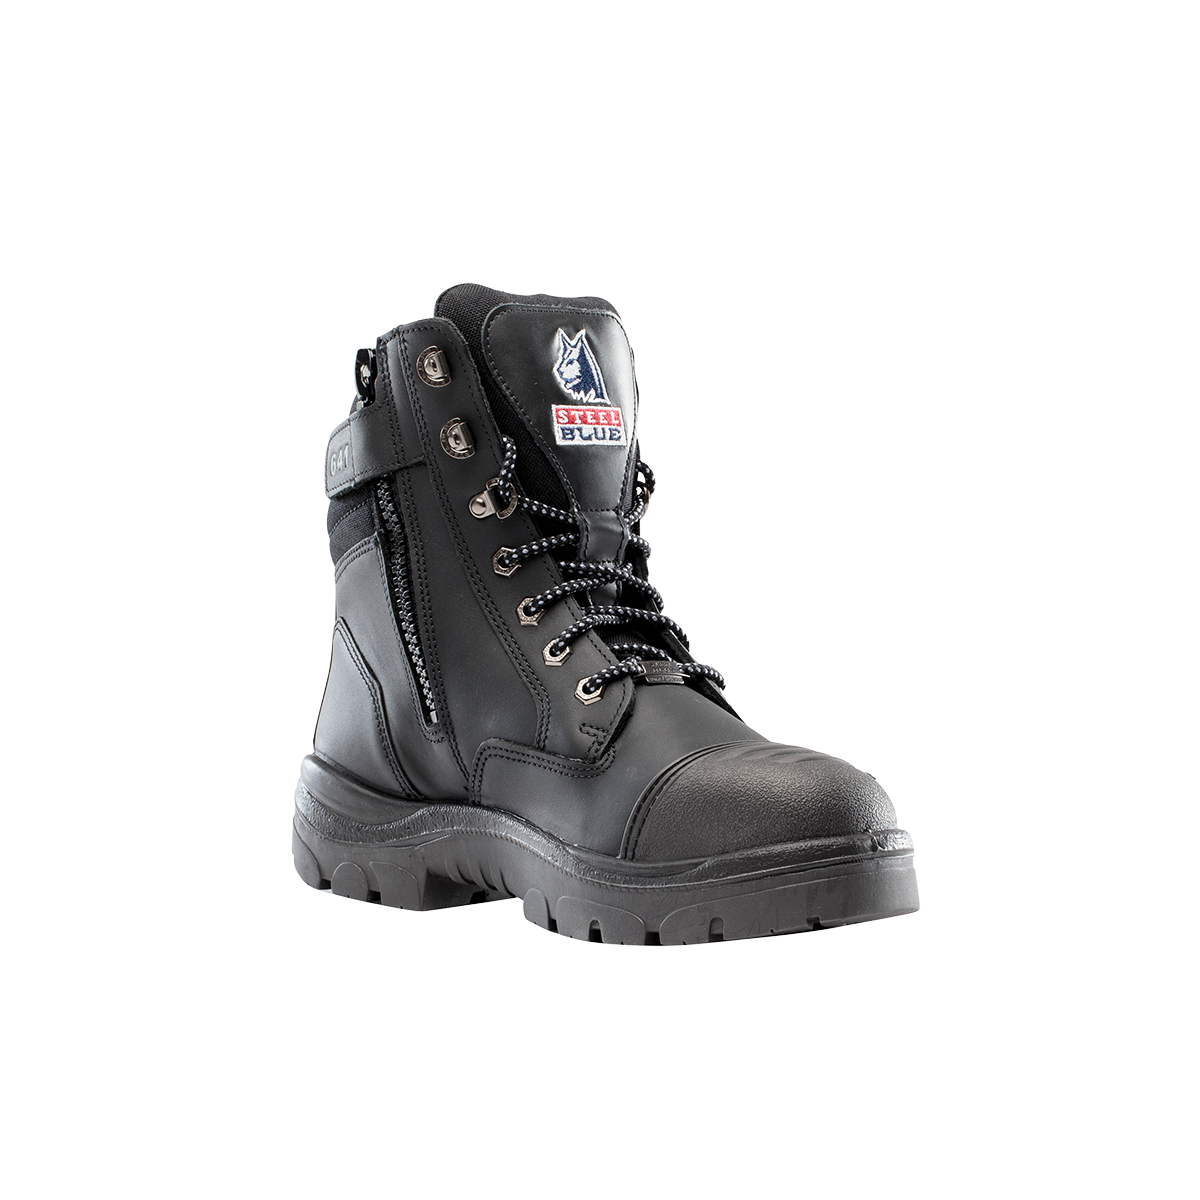 Southern Cross GraphTEC™ S3 Safety Boots